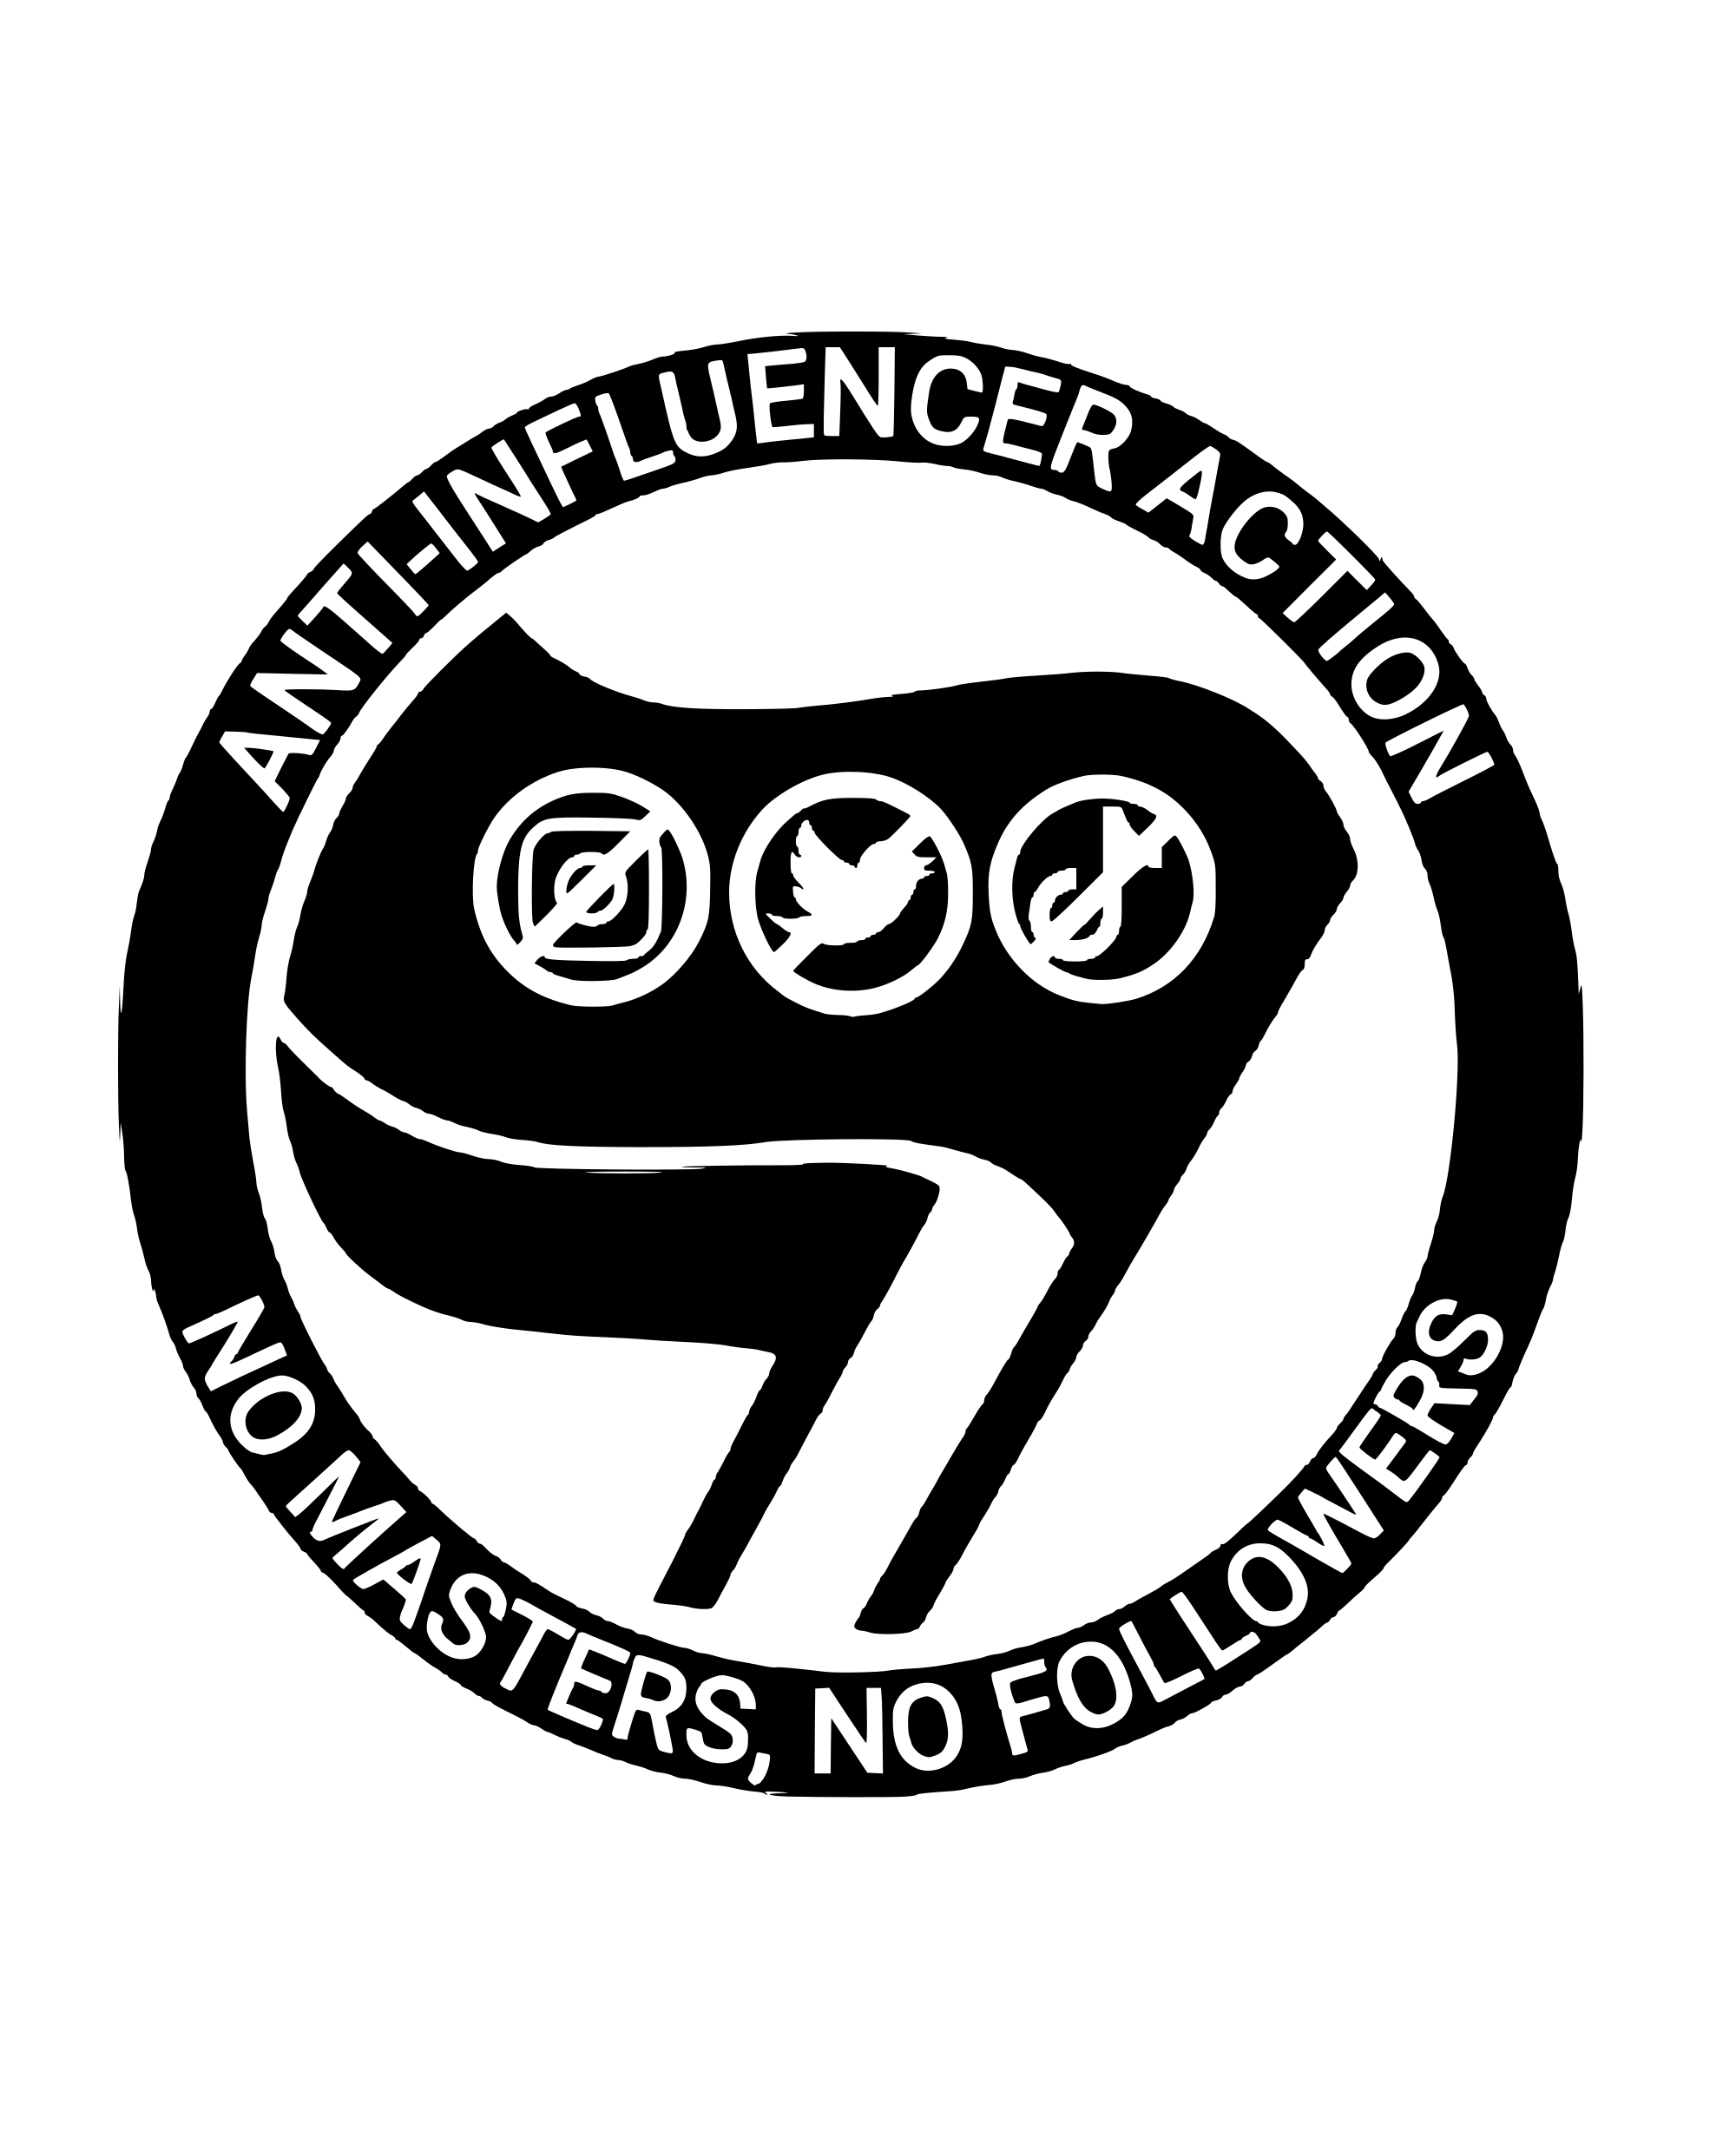 Anti-Influencer action. No masters, no followers